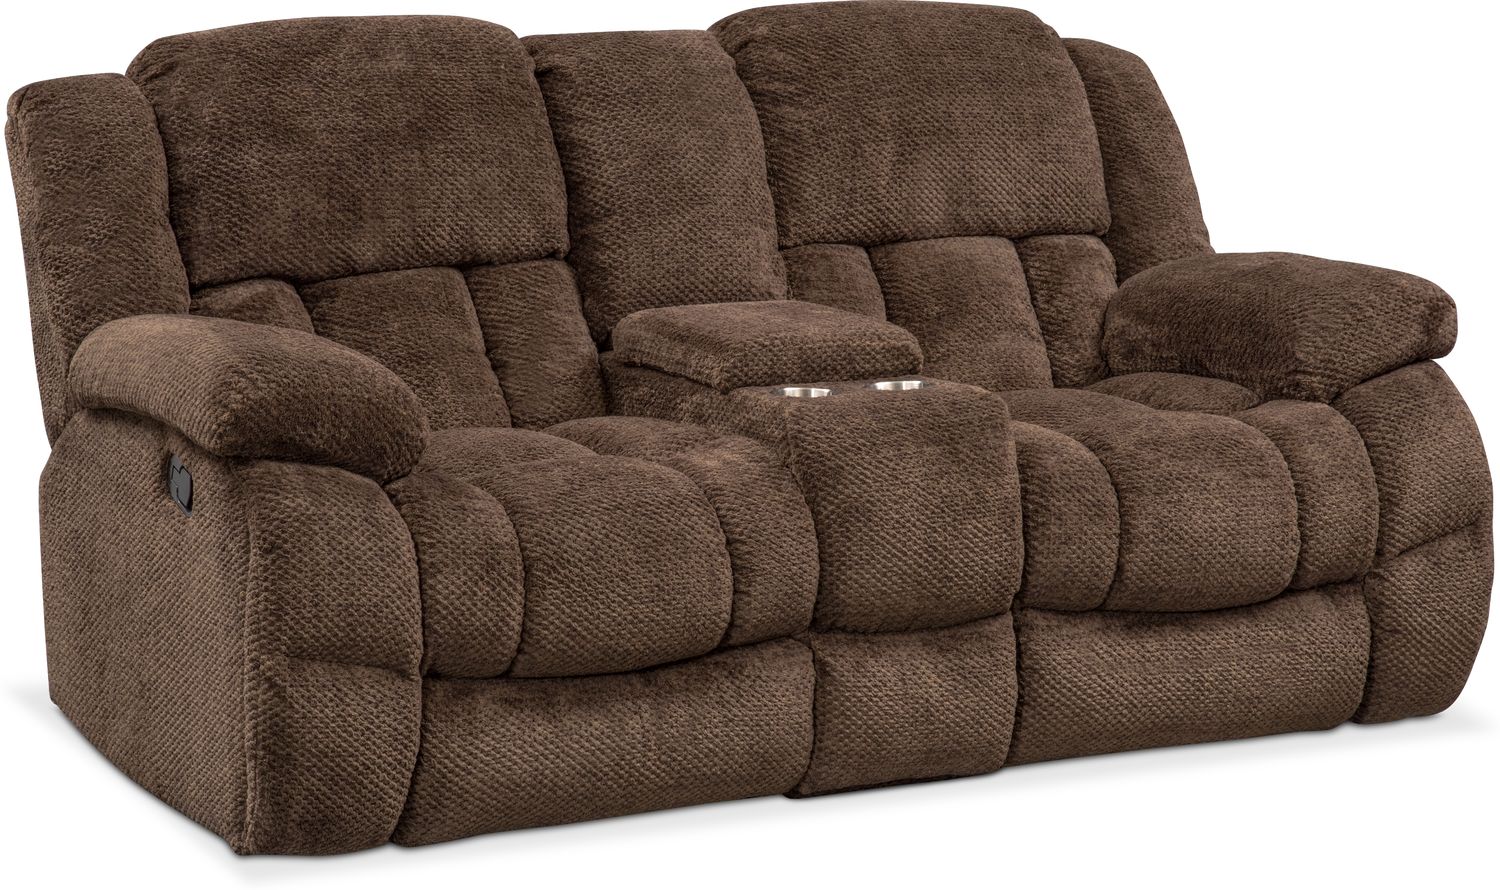 Turbo Reclining Loveseat with Console